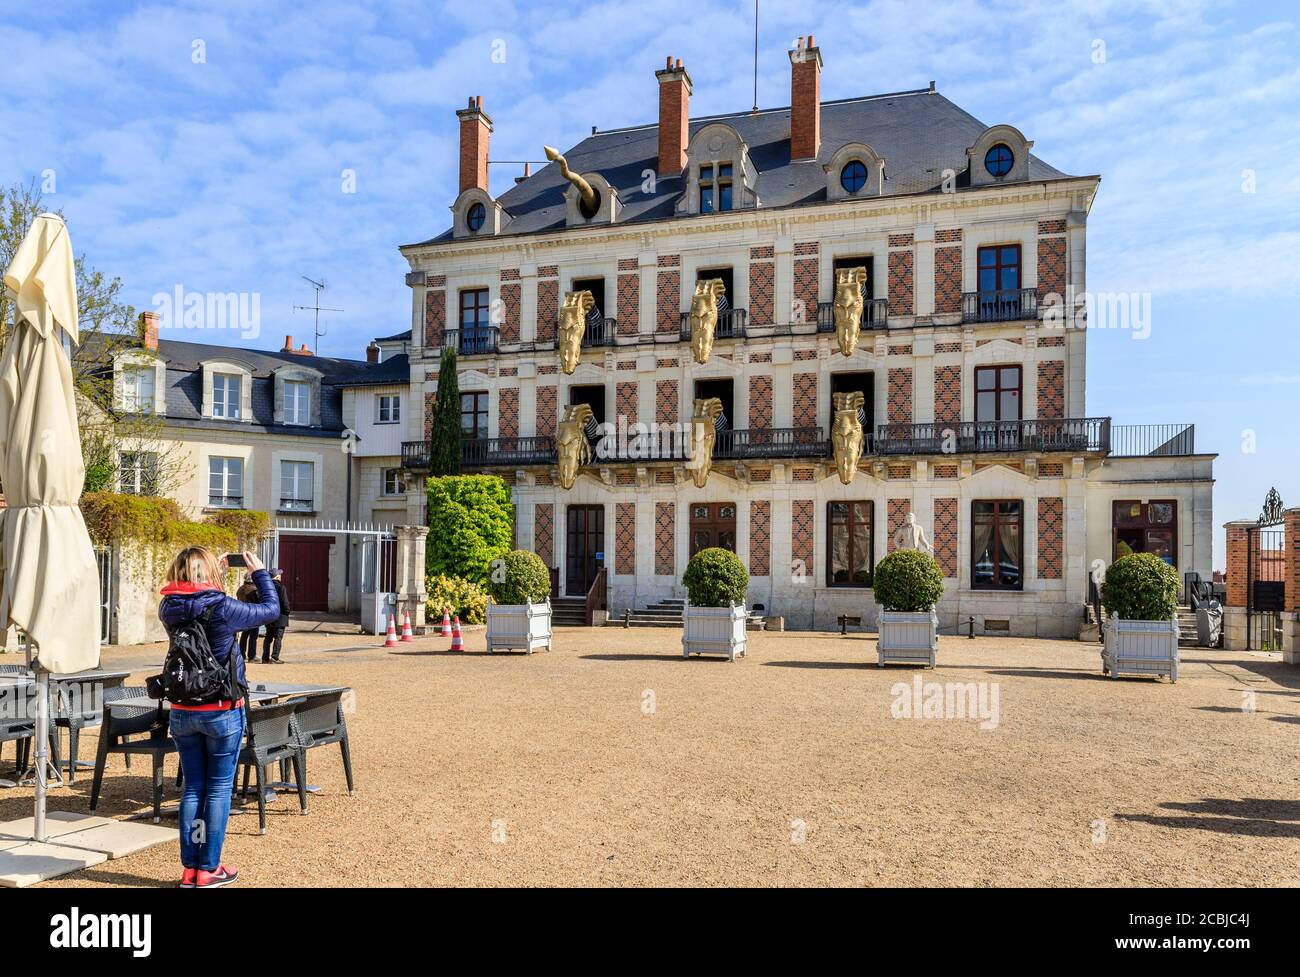 France, Loir et Cher, Loire Valley listed as World Heritage by UNESCO, Blois, Maison de la Magie Robert-Houdin, museum specializing in illusion and pr Stock Photo